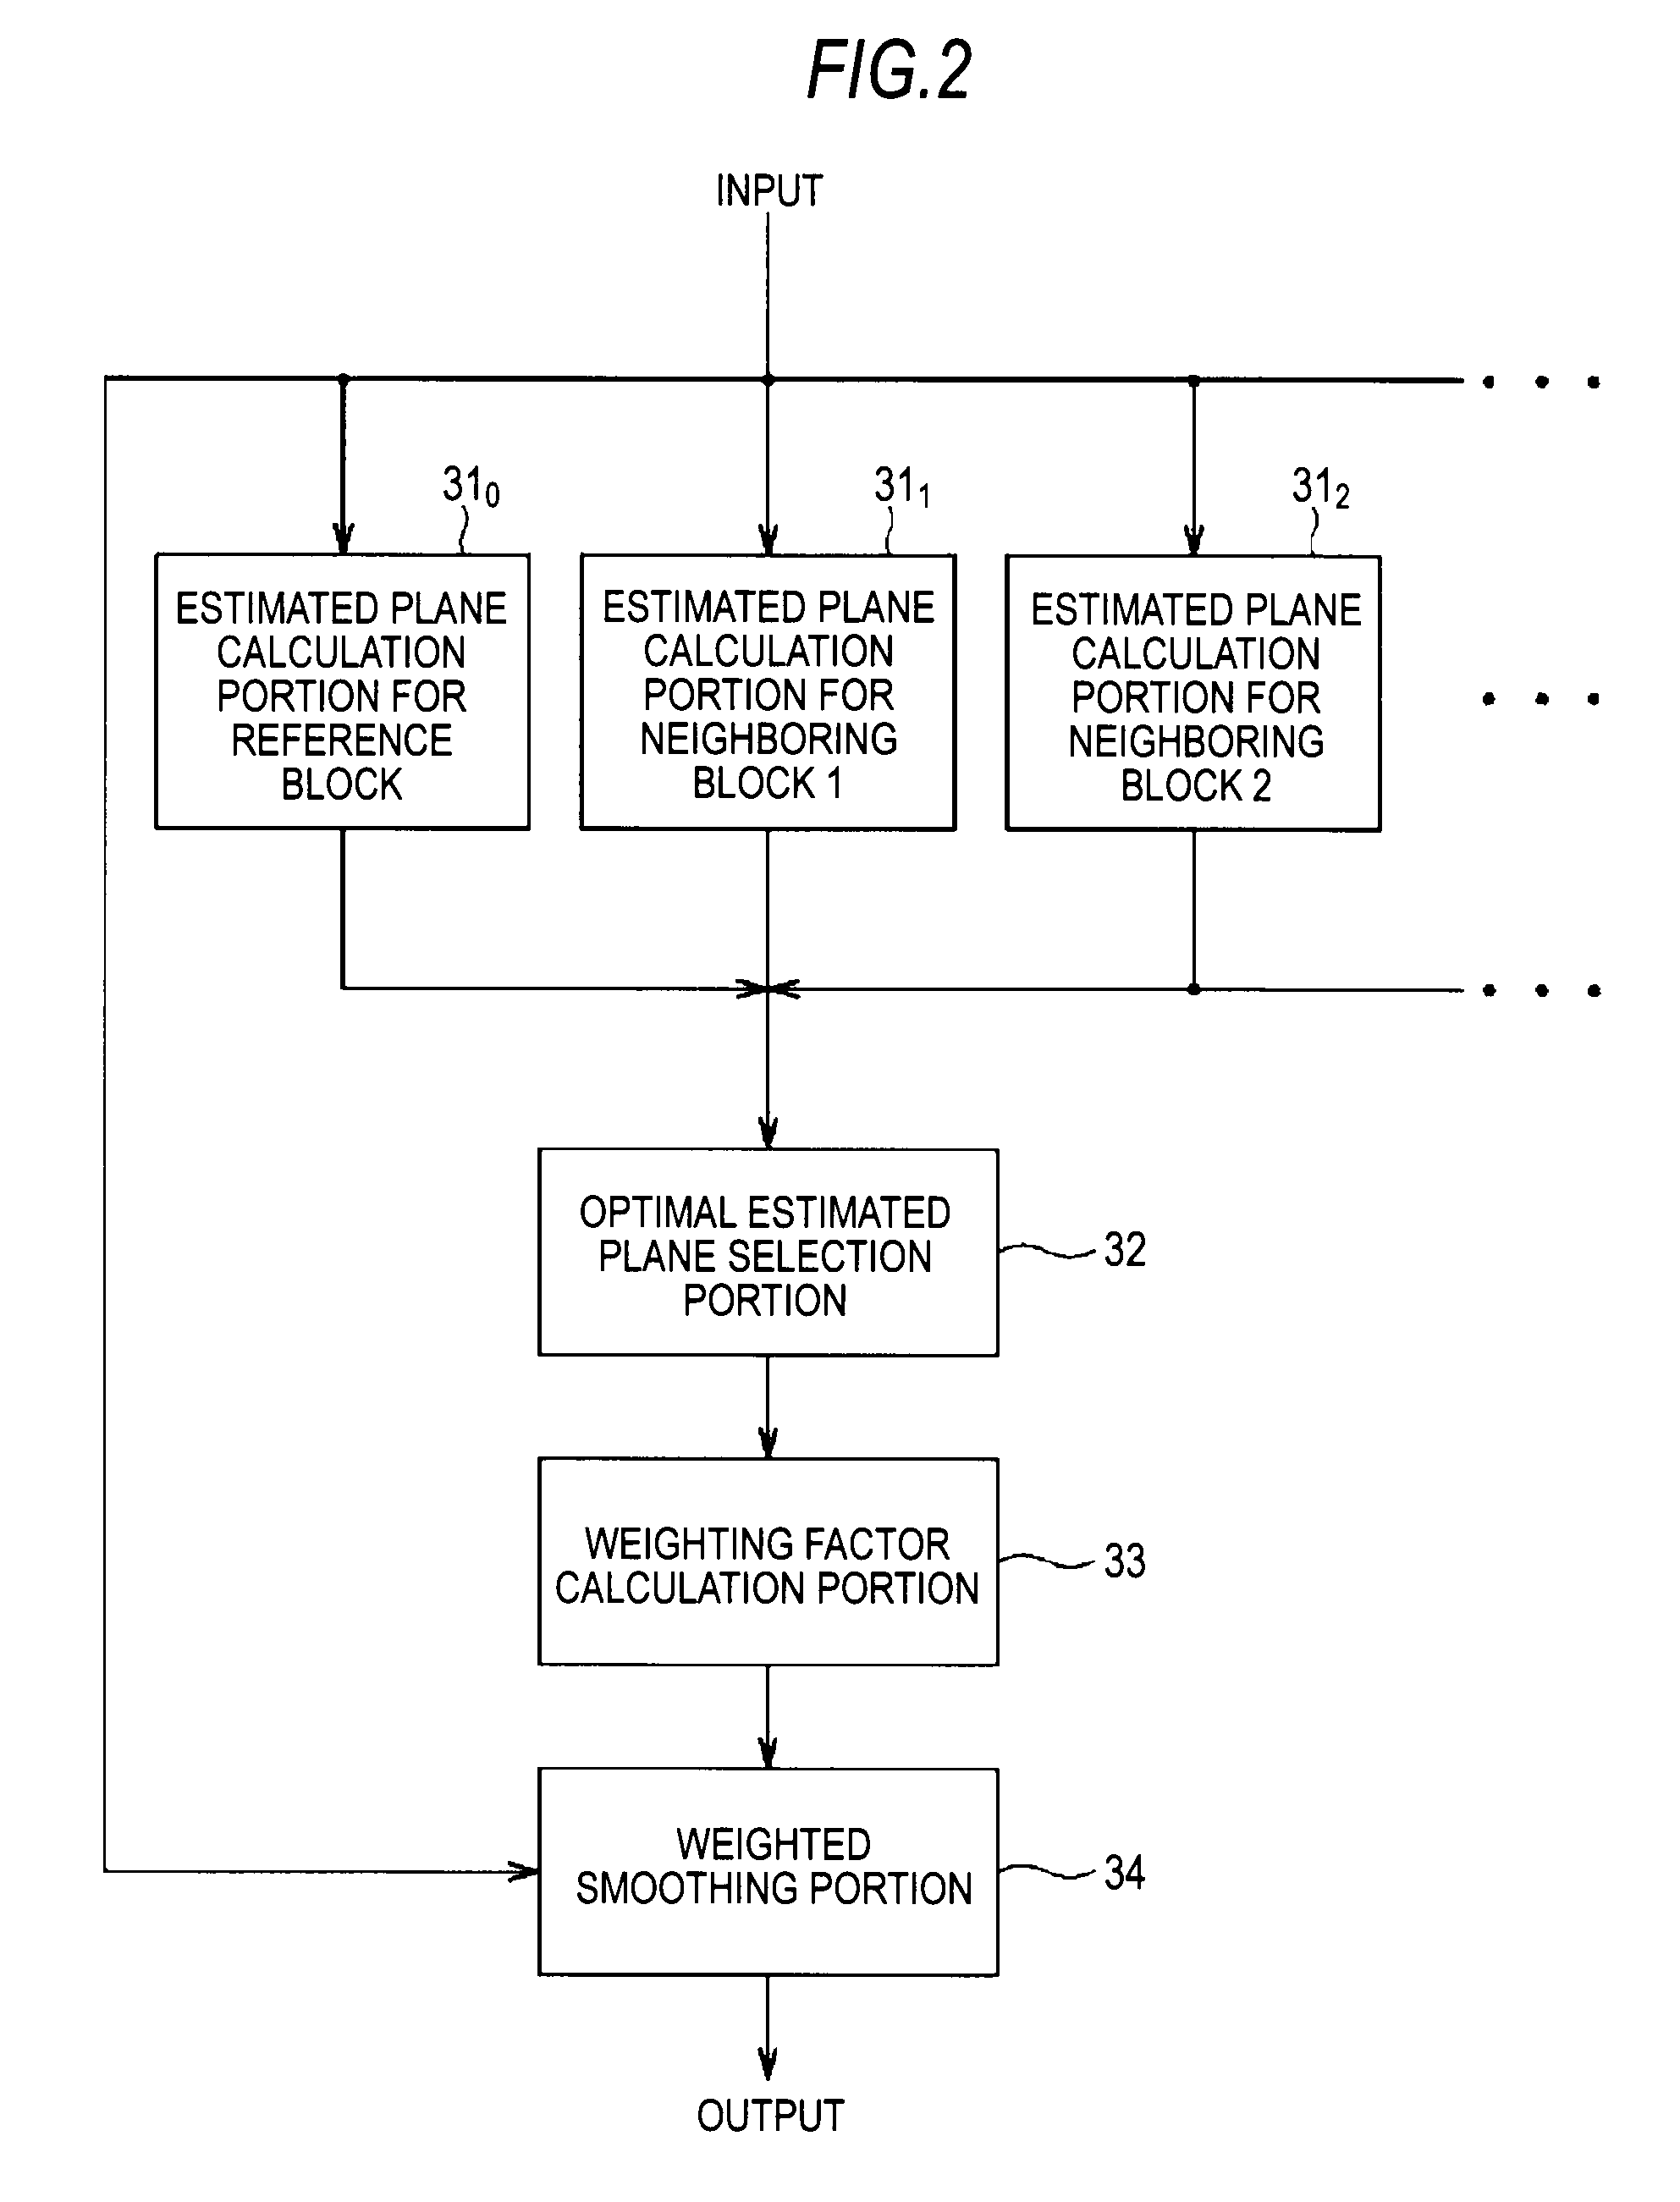 Image processing device and associated methodology of processing gradation noise